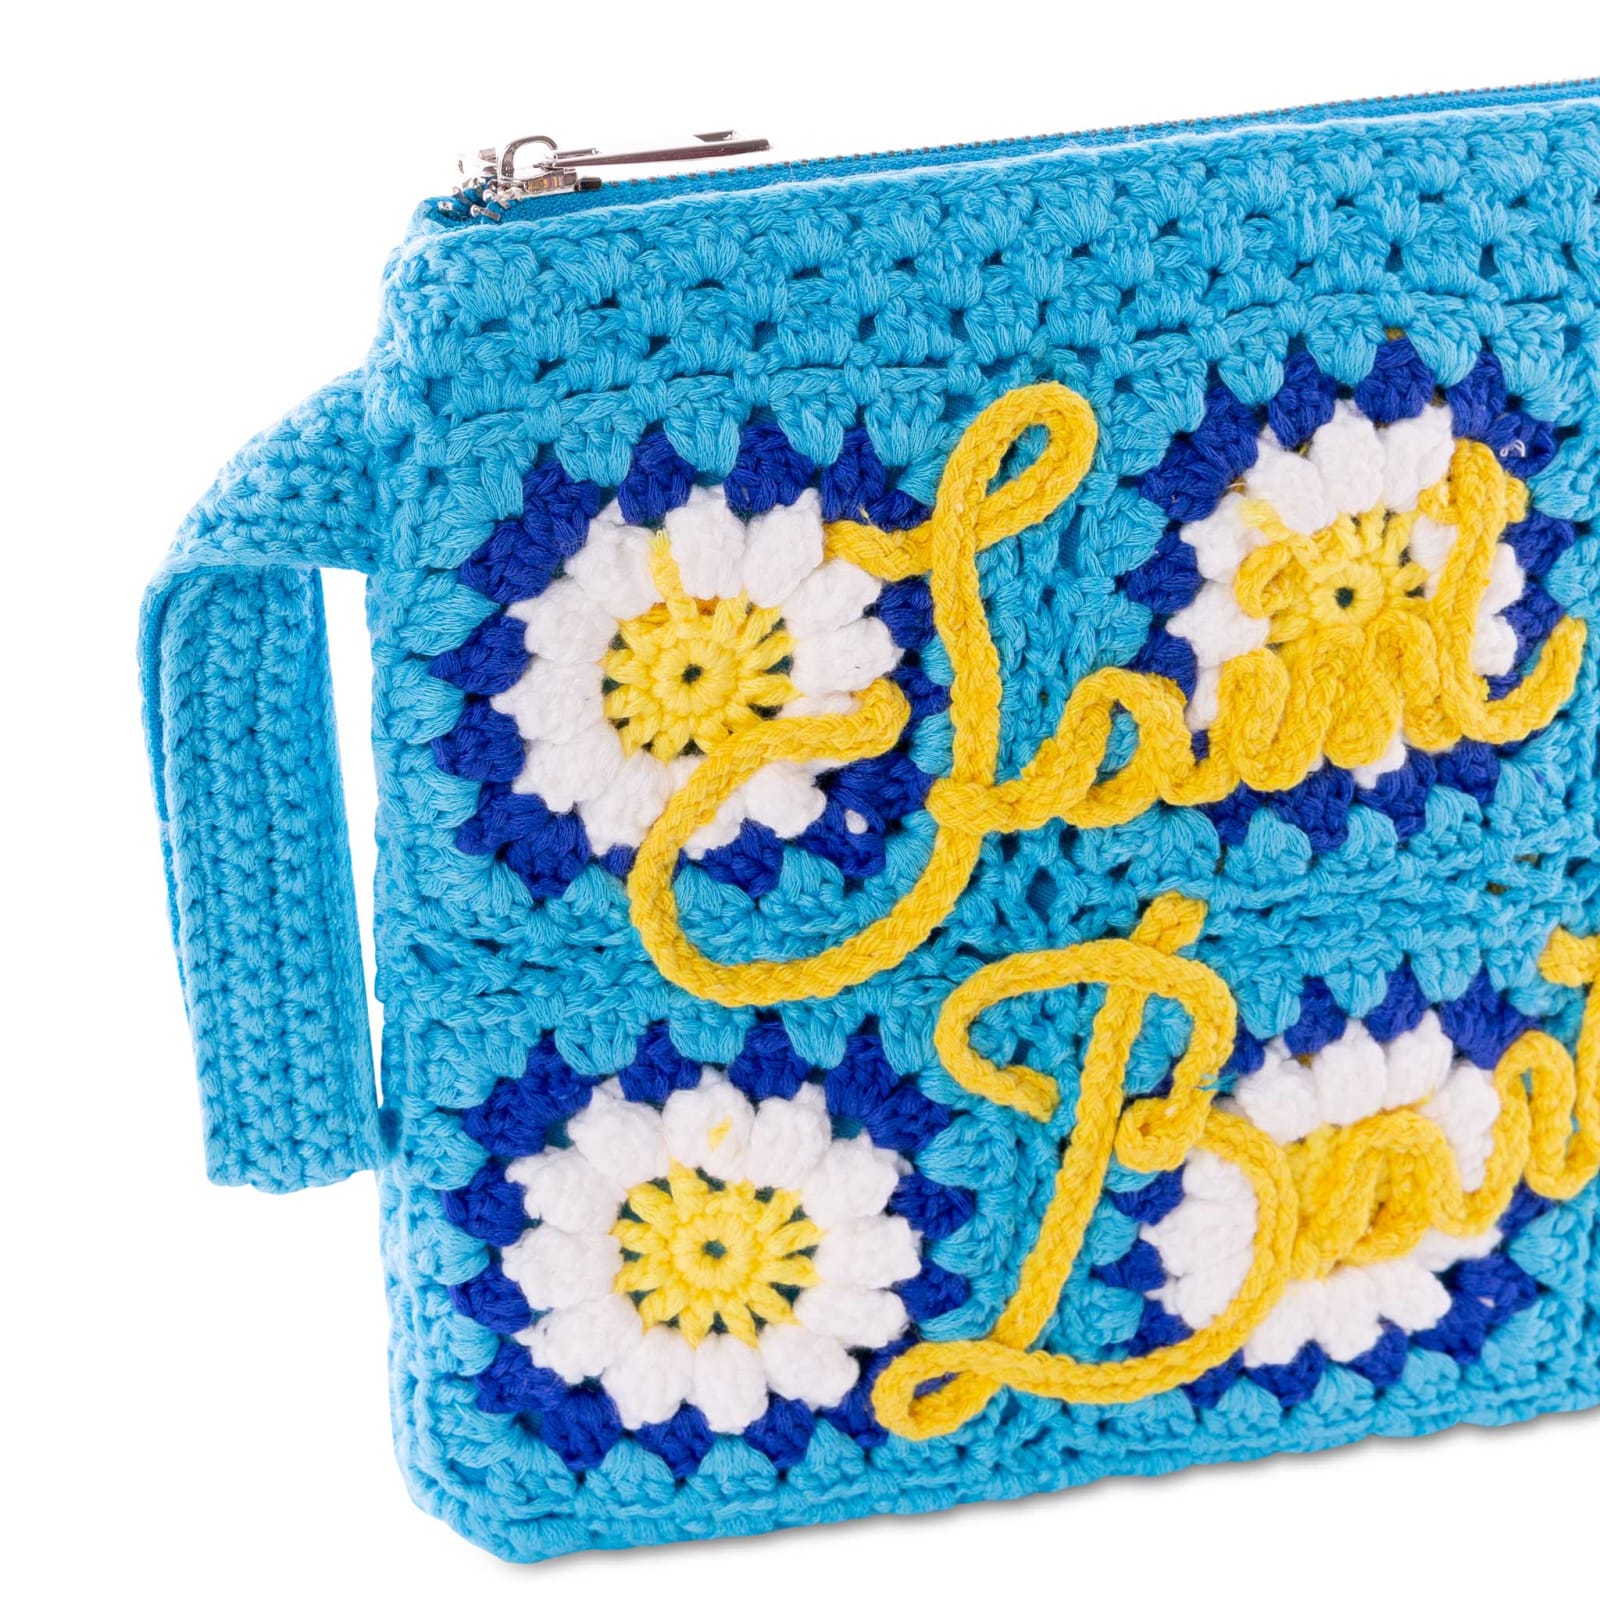 Shop Mc2 Saint Barth Parisienne Crochet Pouch Bag With Daisy Embroidery In Blue